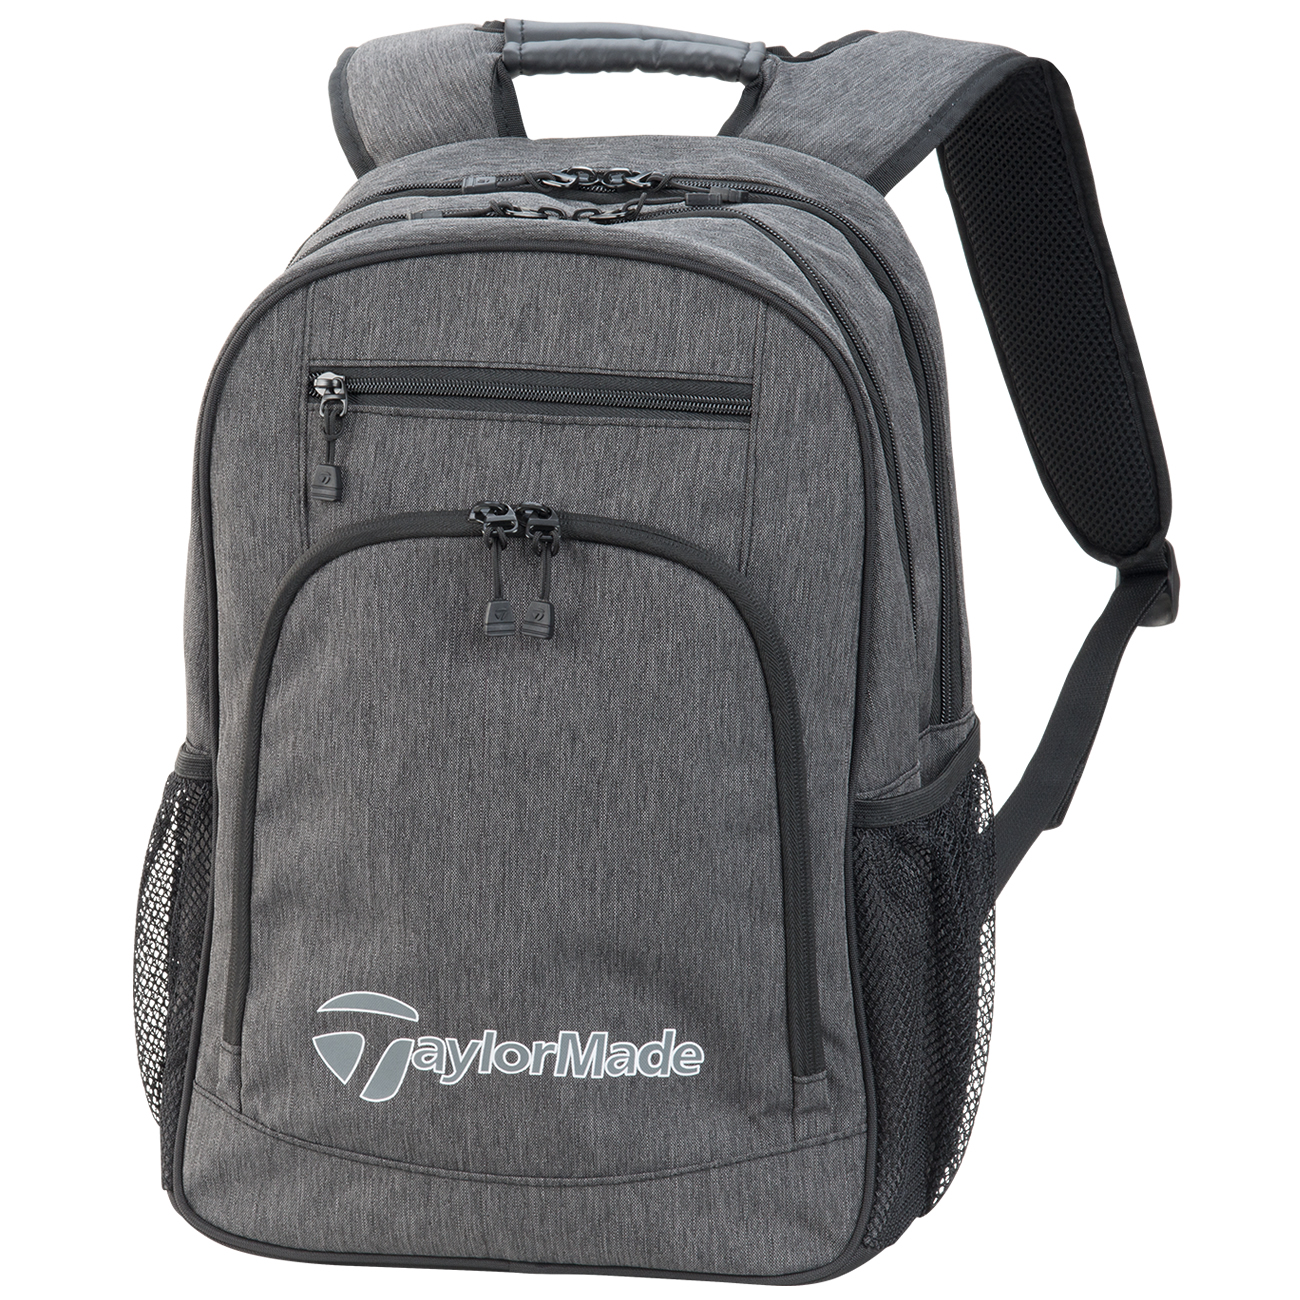 Taylormade Classic Backpack | Scottsdale Golf